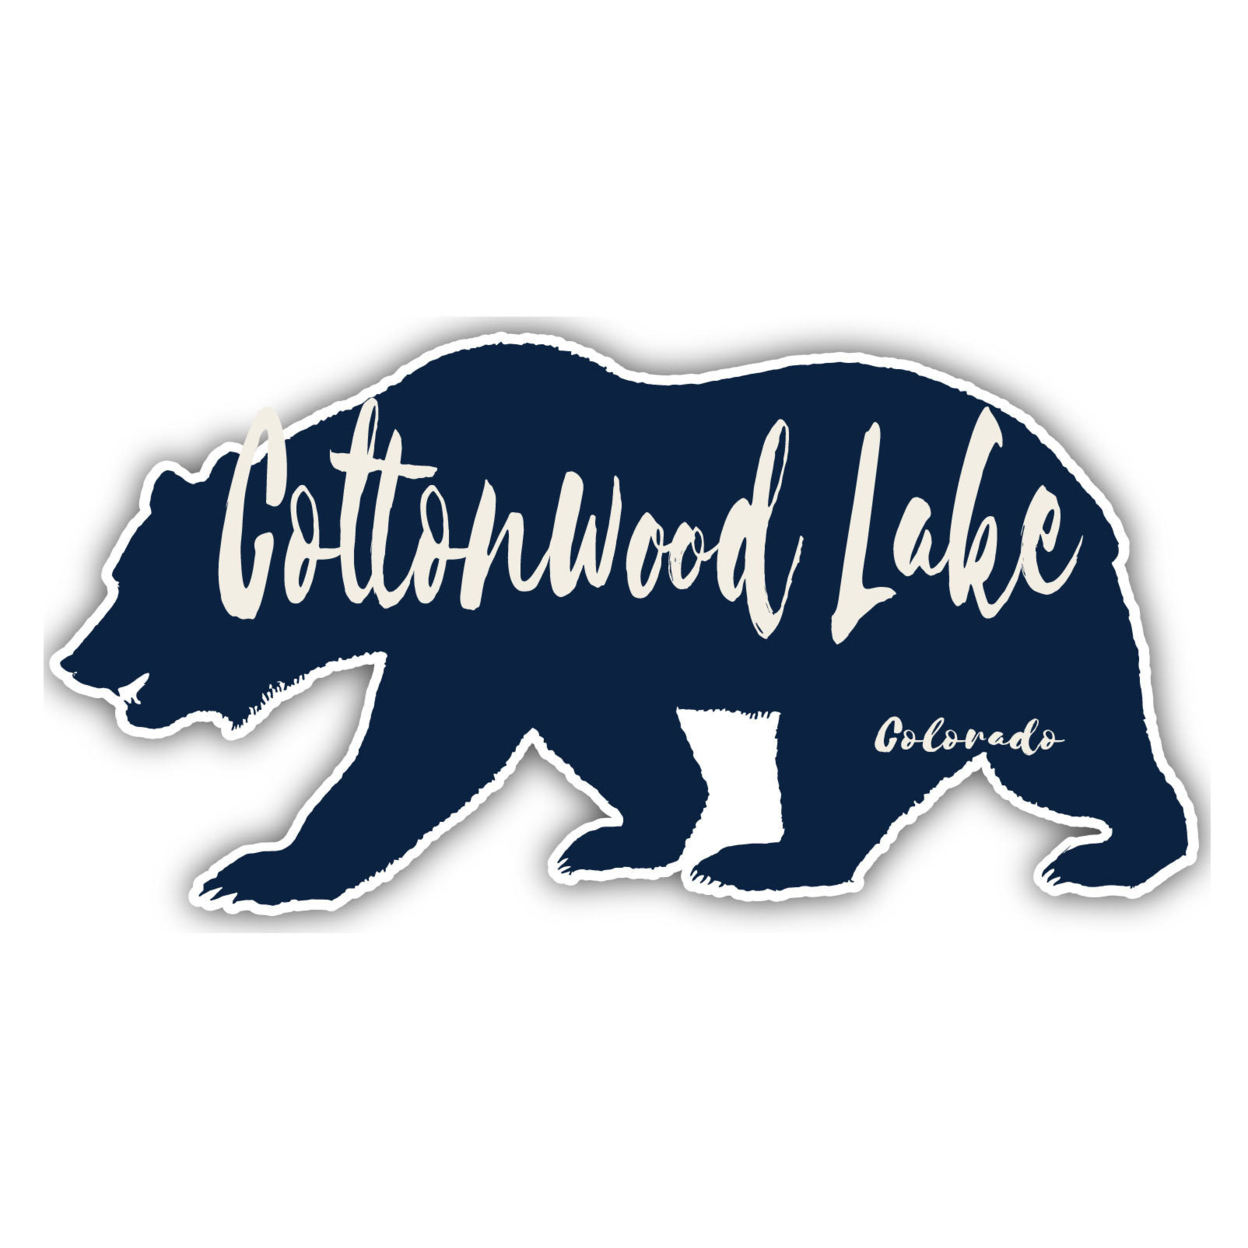 Cottonwood Lake Colorado Souvenir Decorative Stickers (Choose Theme And Size) - 4-Pack, 8-Inch, Tent